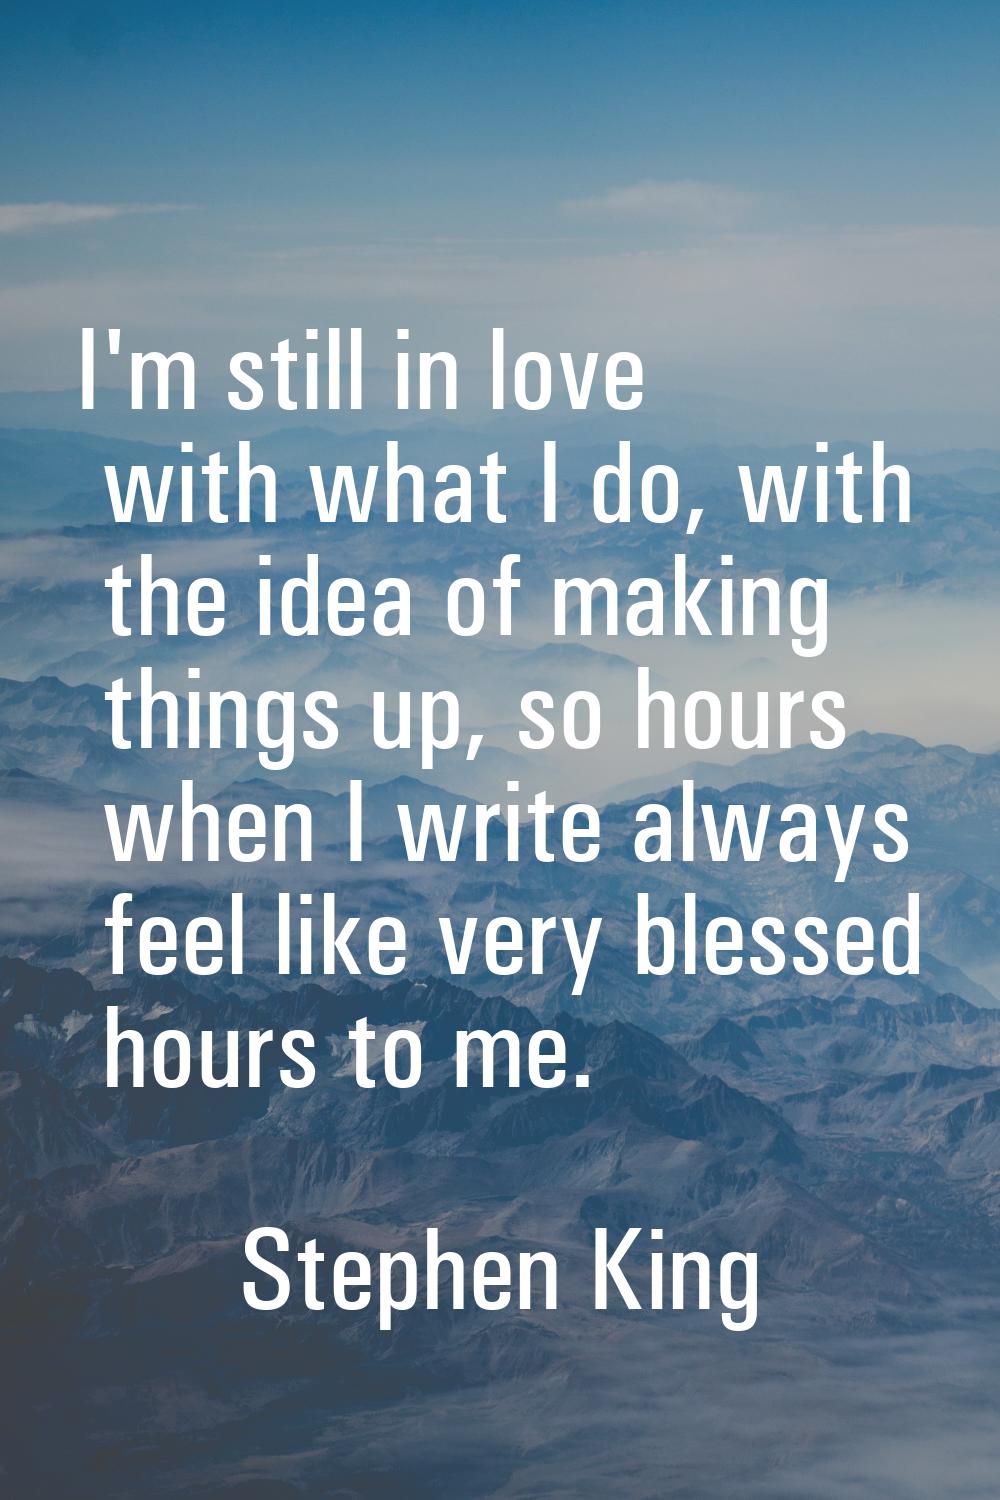 I'm still in love with what I do, with the idea of making things up, so hours when I write always f